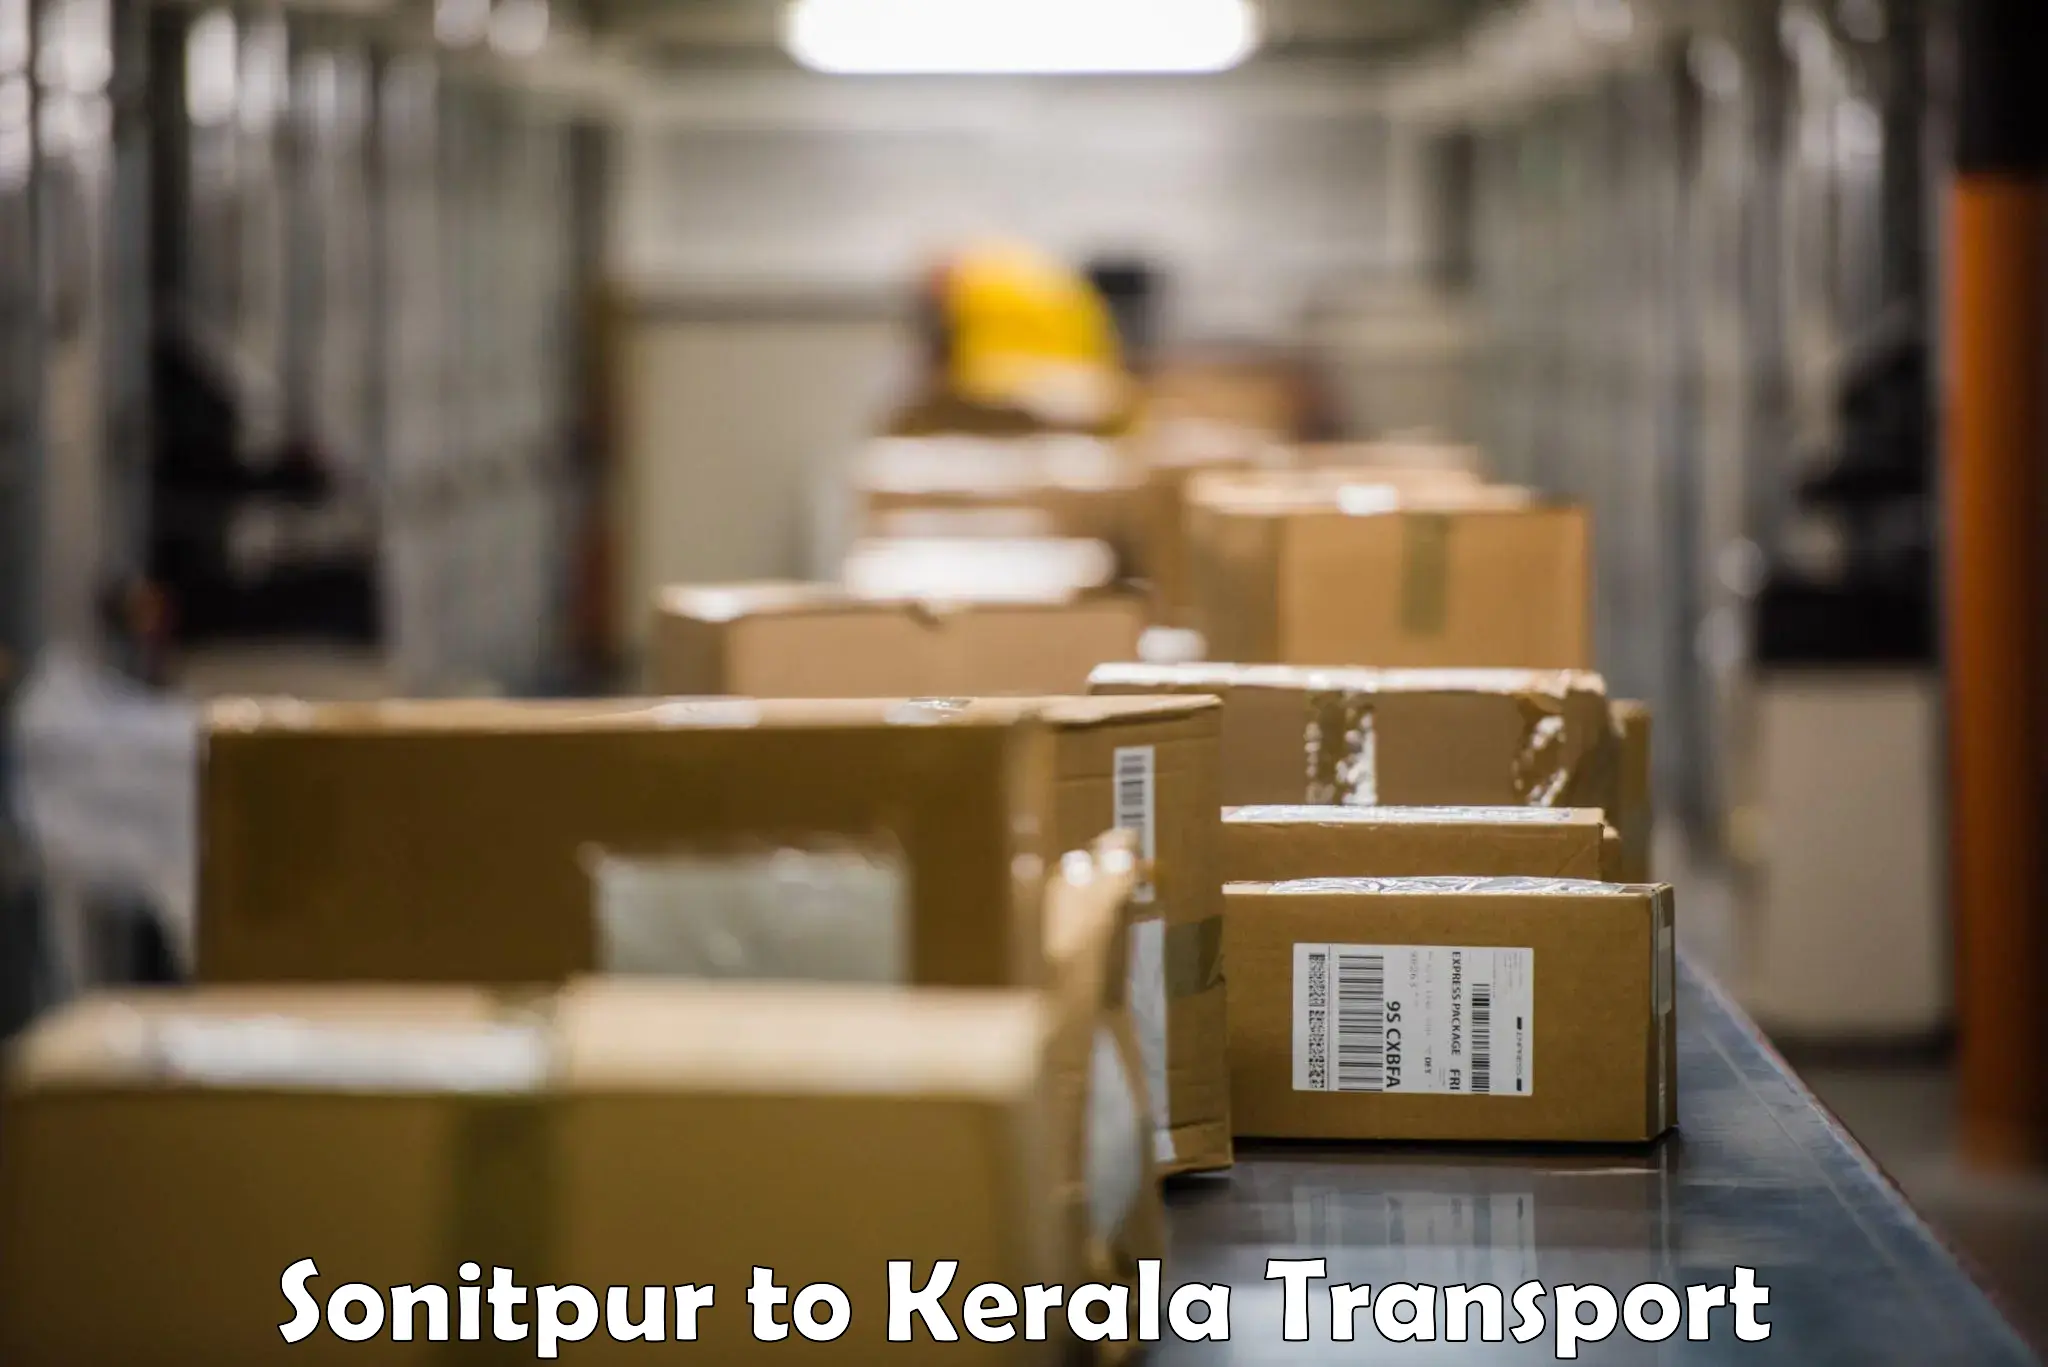 Nationwide transport services Sonitpur to Cochin Port Kochi